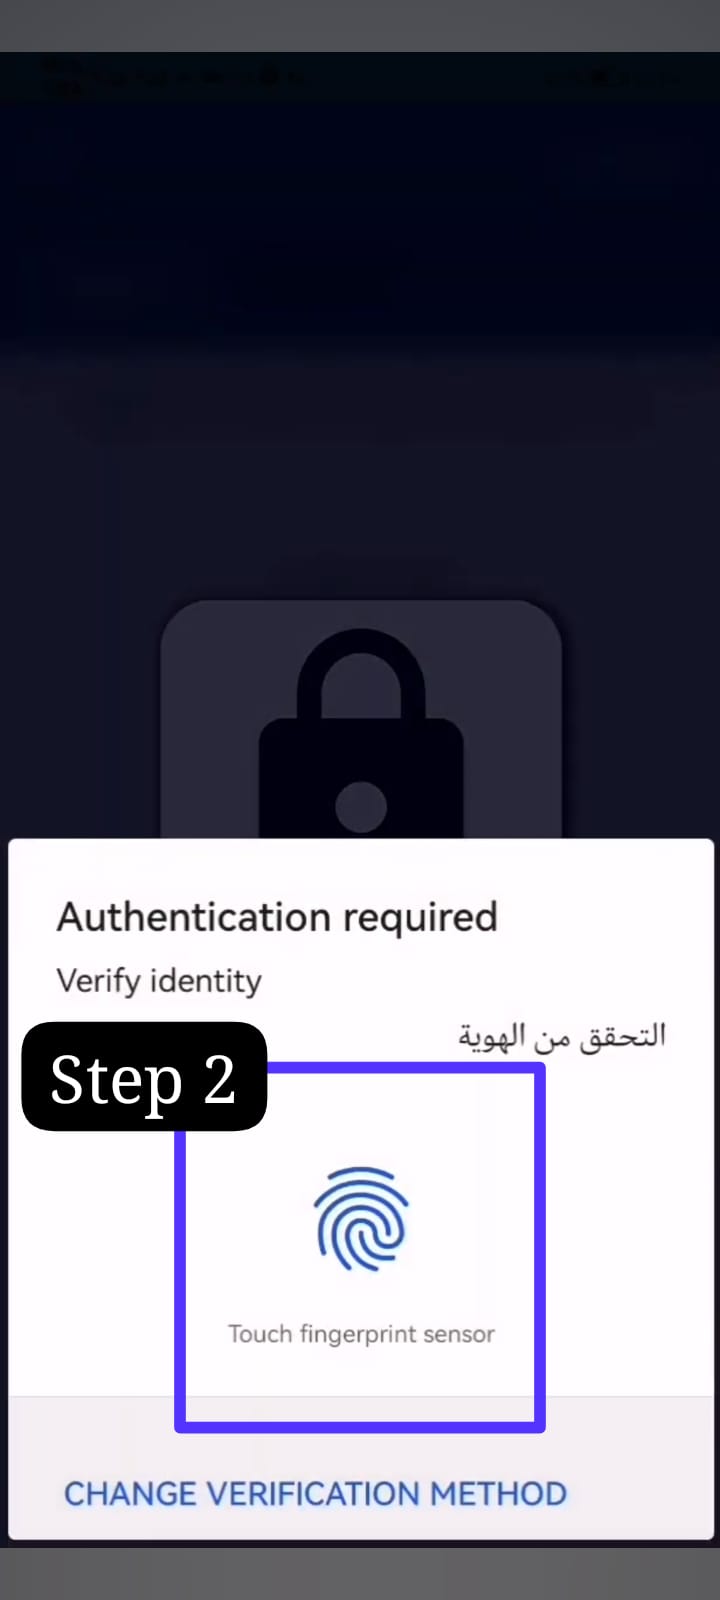 kuwait biometric appointment: Easy Scheduling Through Meta, Sahel, and MOI